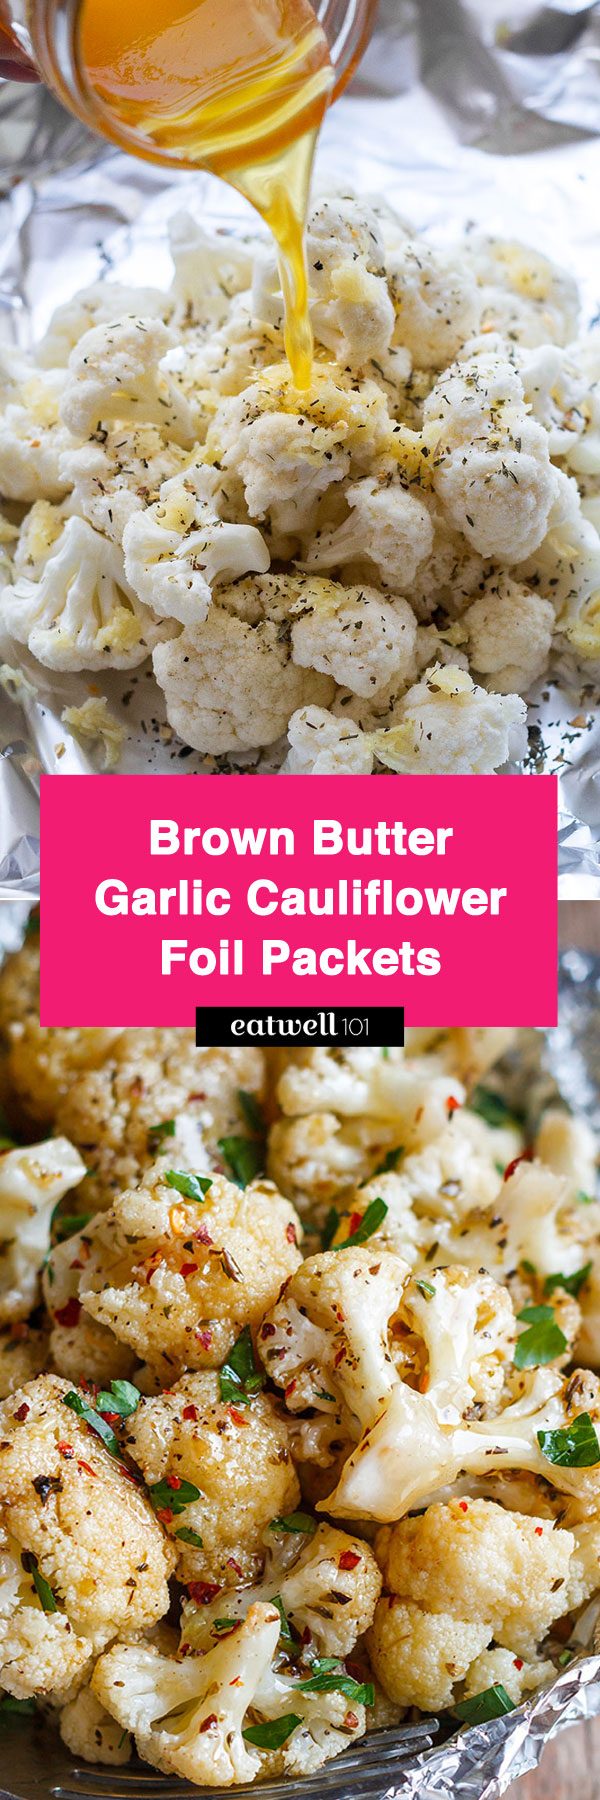 Brown Butter Garlic Cauliflower Foil Packets - #cauliflower #recipe #eatwell101 - Quick, easy and healthy, these cauliflower foil packets make for a full vegetarian/paleo/low-carb meal with zero clean-up. 